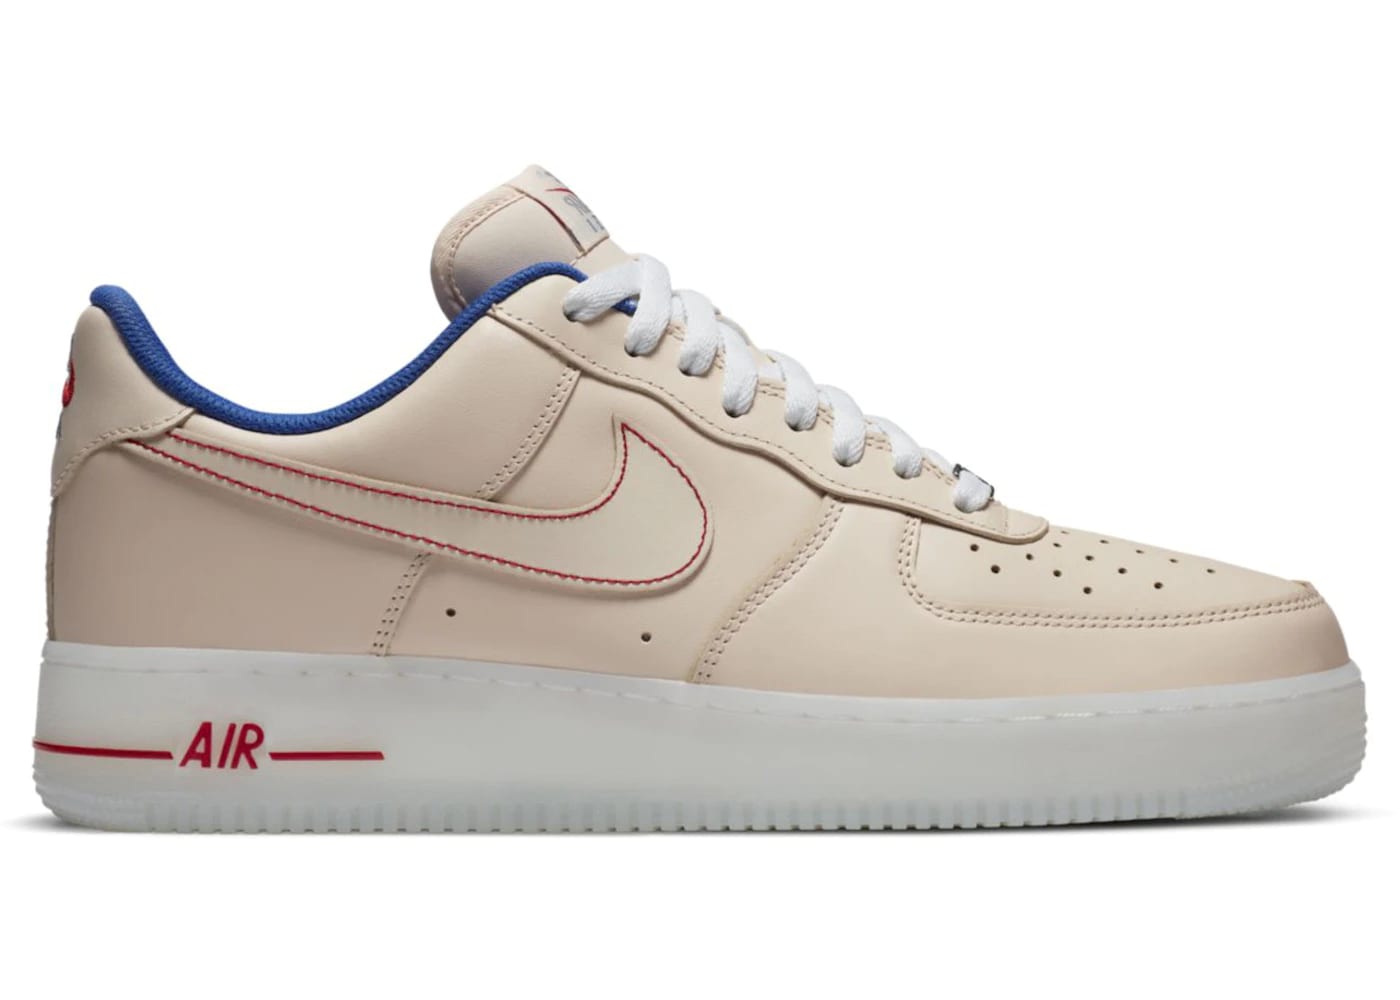 Nike Air Force 1 Low 07 LV8 Ice Sole – Online